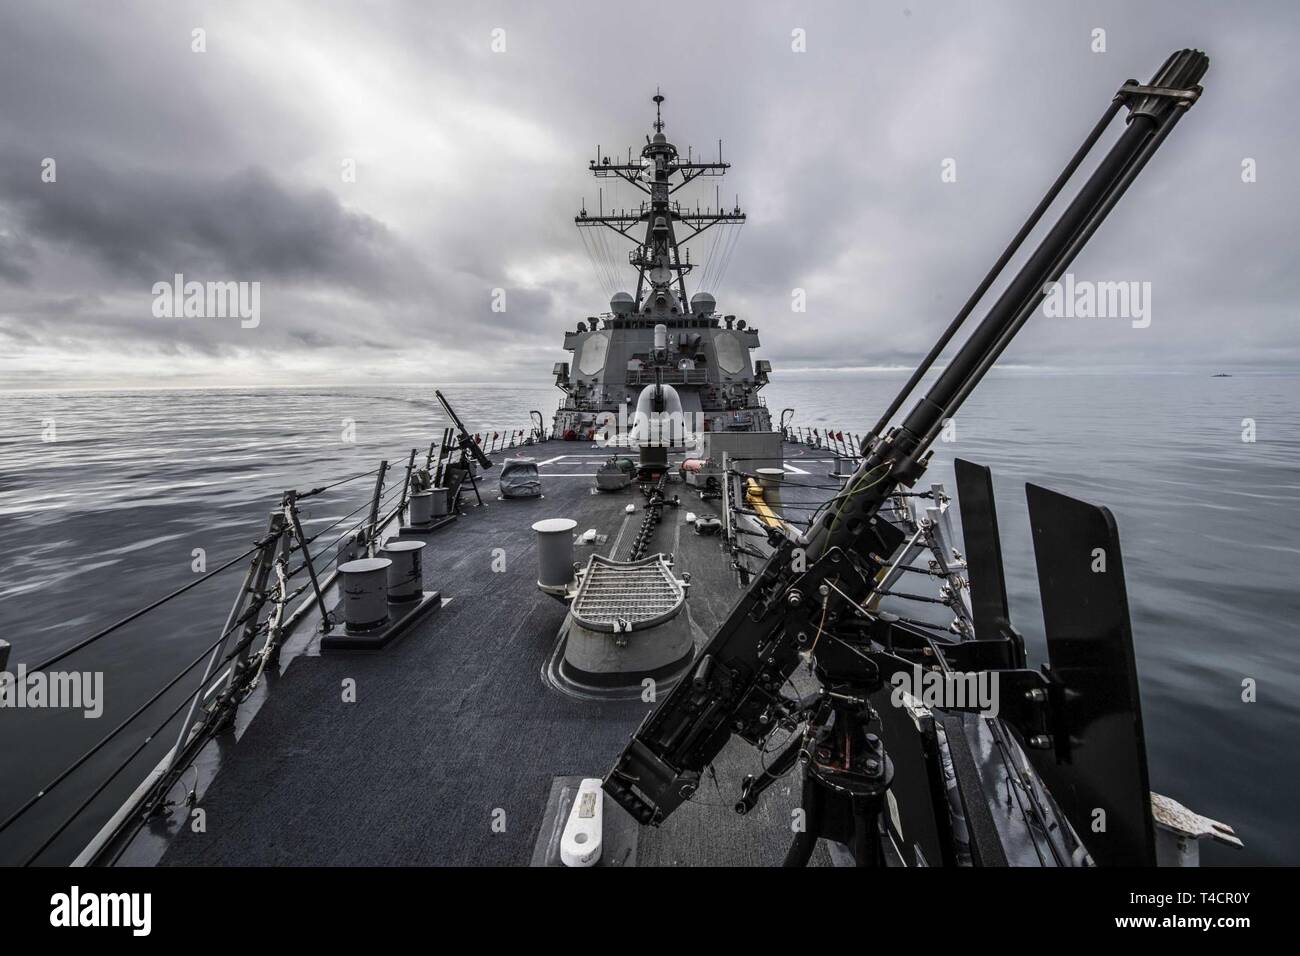 CHANNEL (March 21, 2019) The Arleigh Burke-class guided-missile destroyer USS Porter (DDG 78) transits the English Channel, March 21, 2019. Porter, forward-deployed to Rota, Spain, is on its sixth patrol in the U.S. 6th Fleet area of operations in support of U.S national security interests in Europe and Africa. Stock Photo